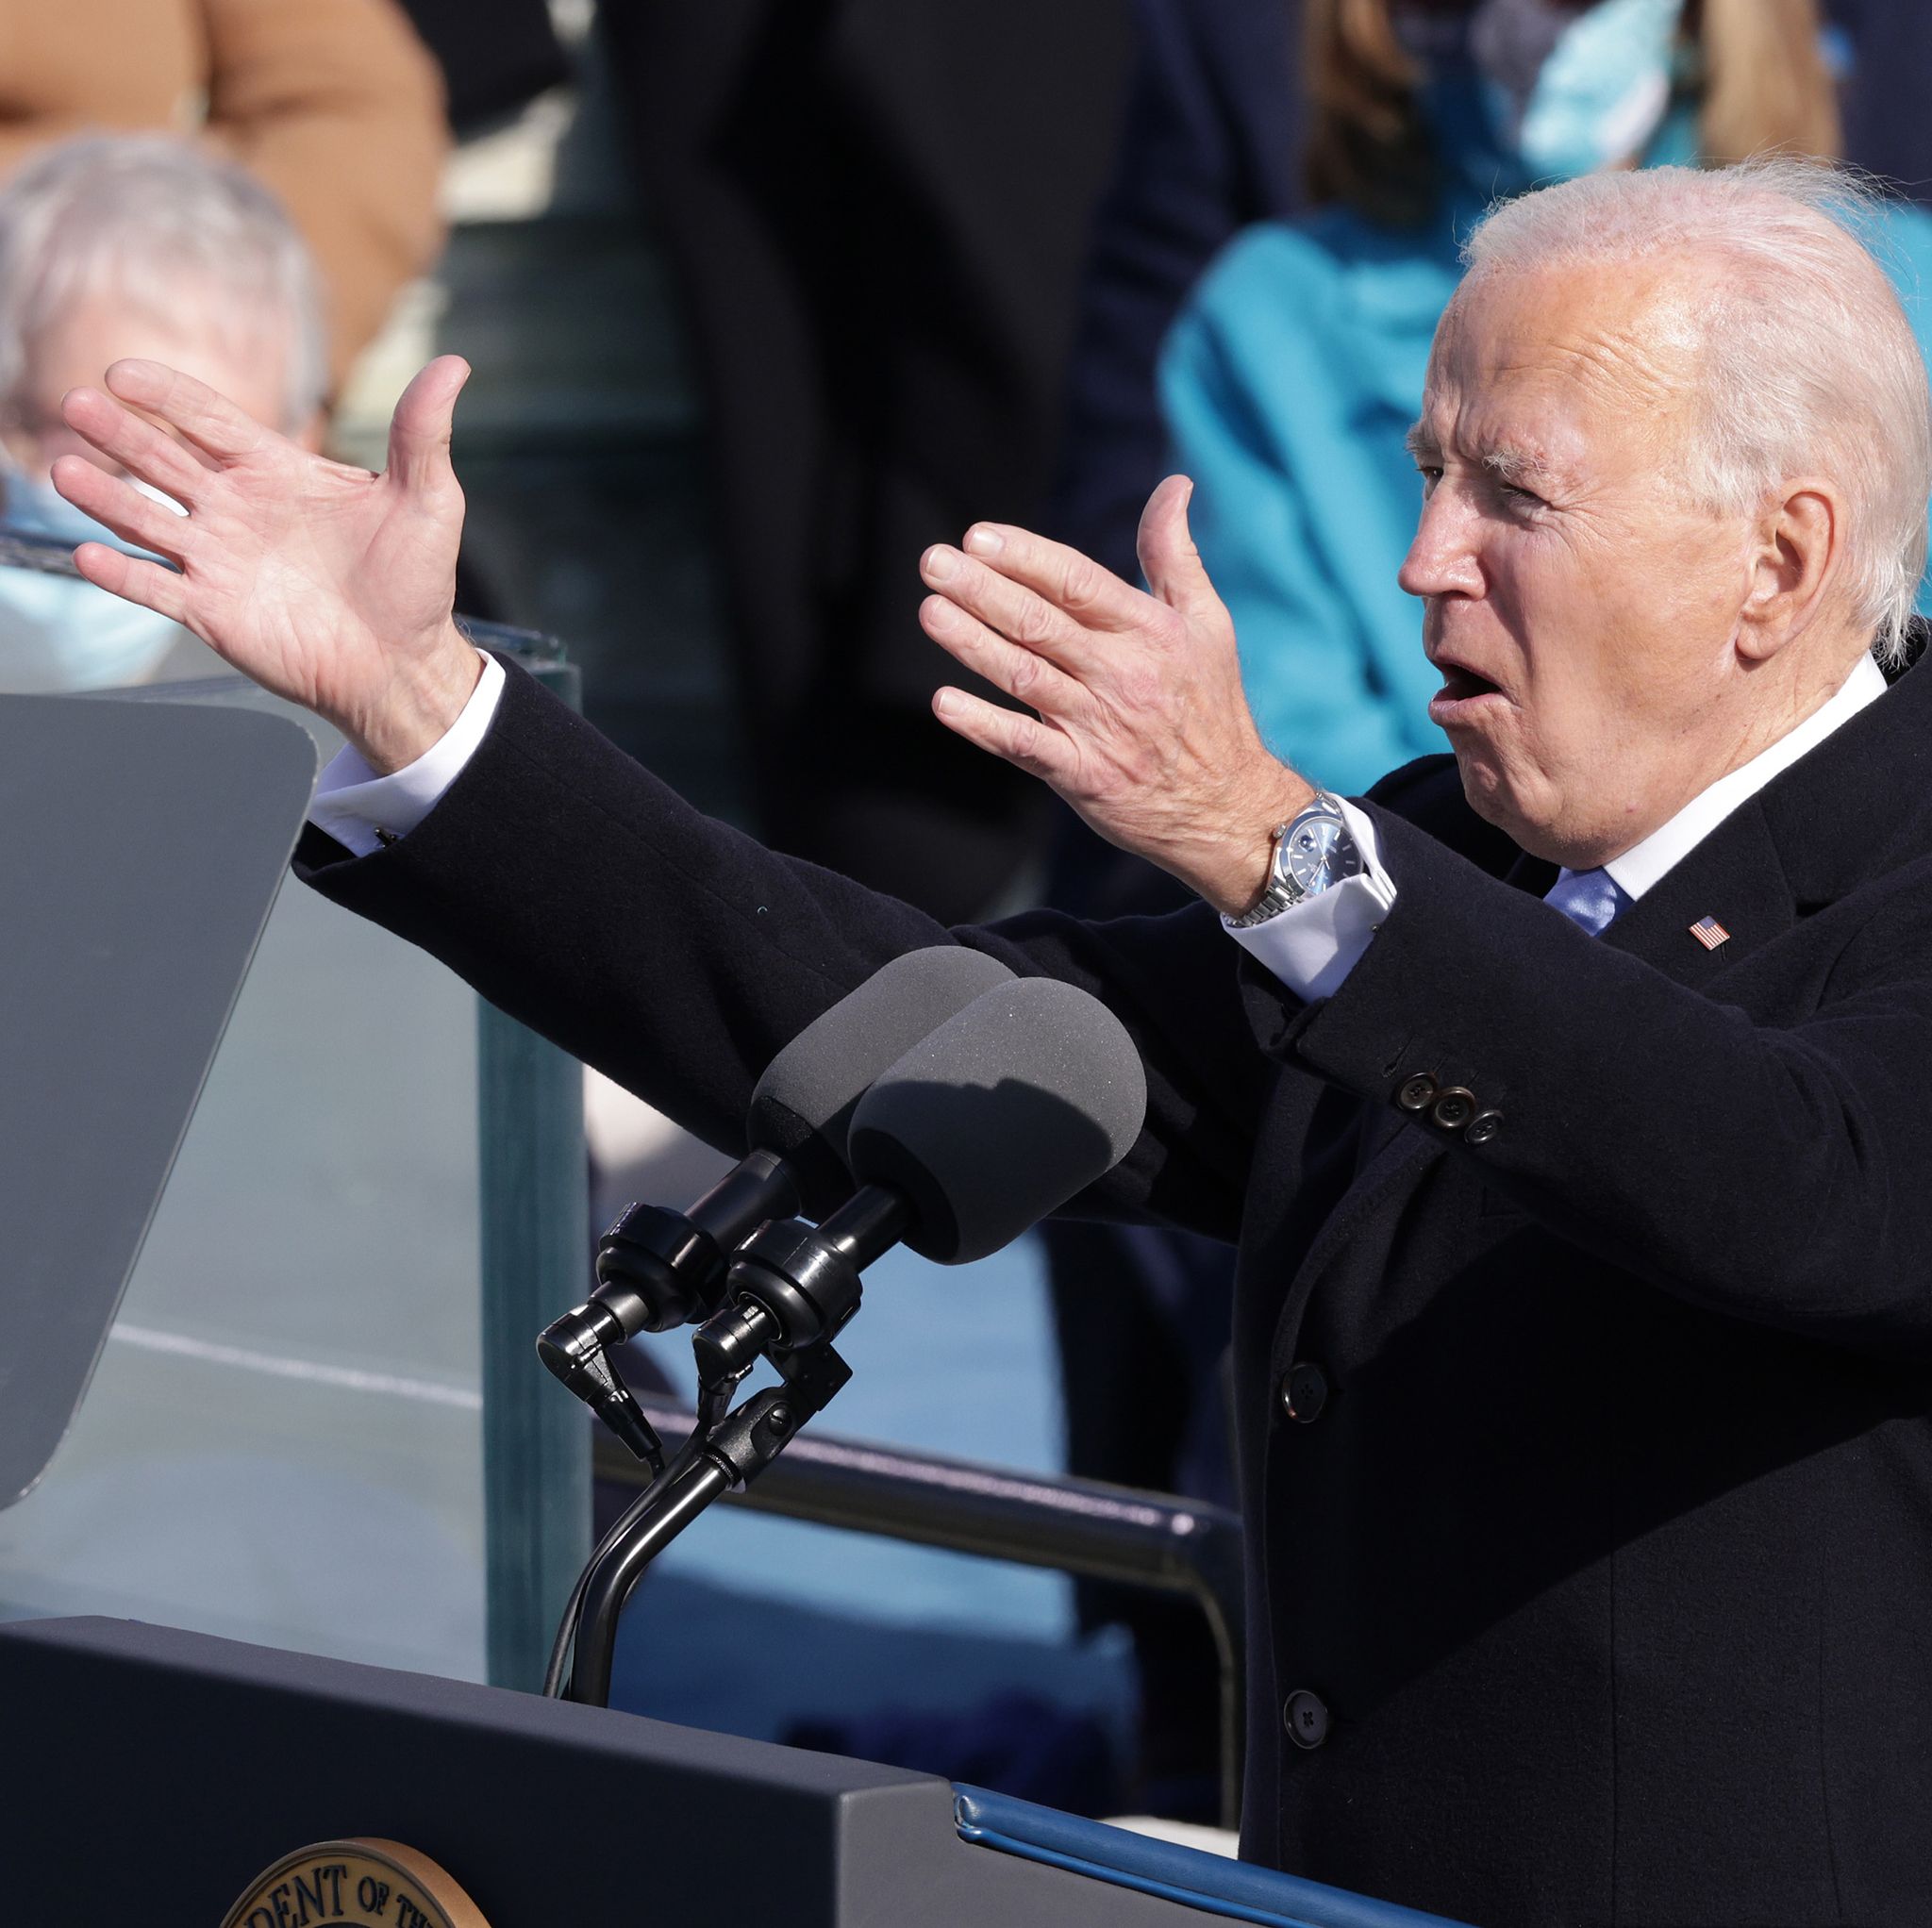 washington, dc   january 20  us president joe biden delivers his inaugural address on the west front of the us capitol on january 20, 2021 in washington, dc  during today's inauguration ceremony joe biden becomes the 46th president of the united states photo by alex wonggetty images